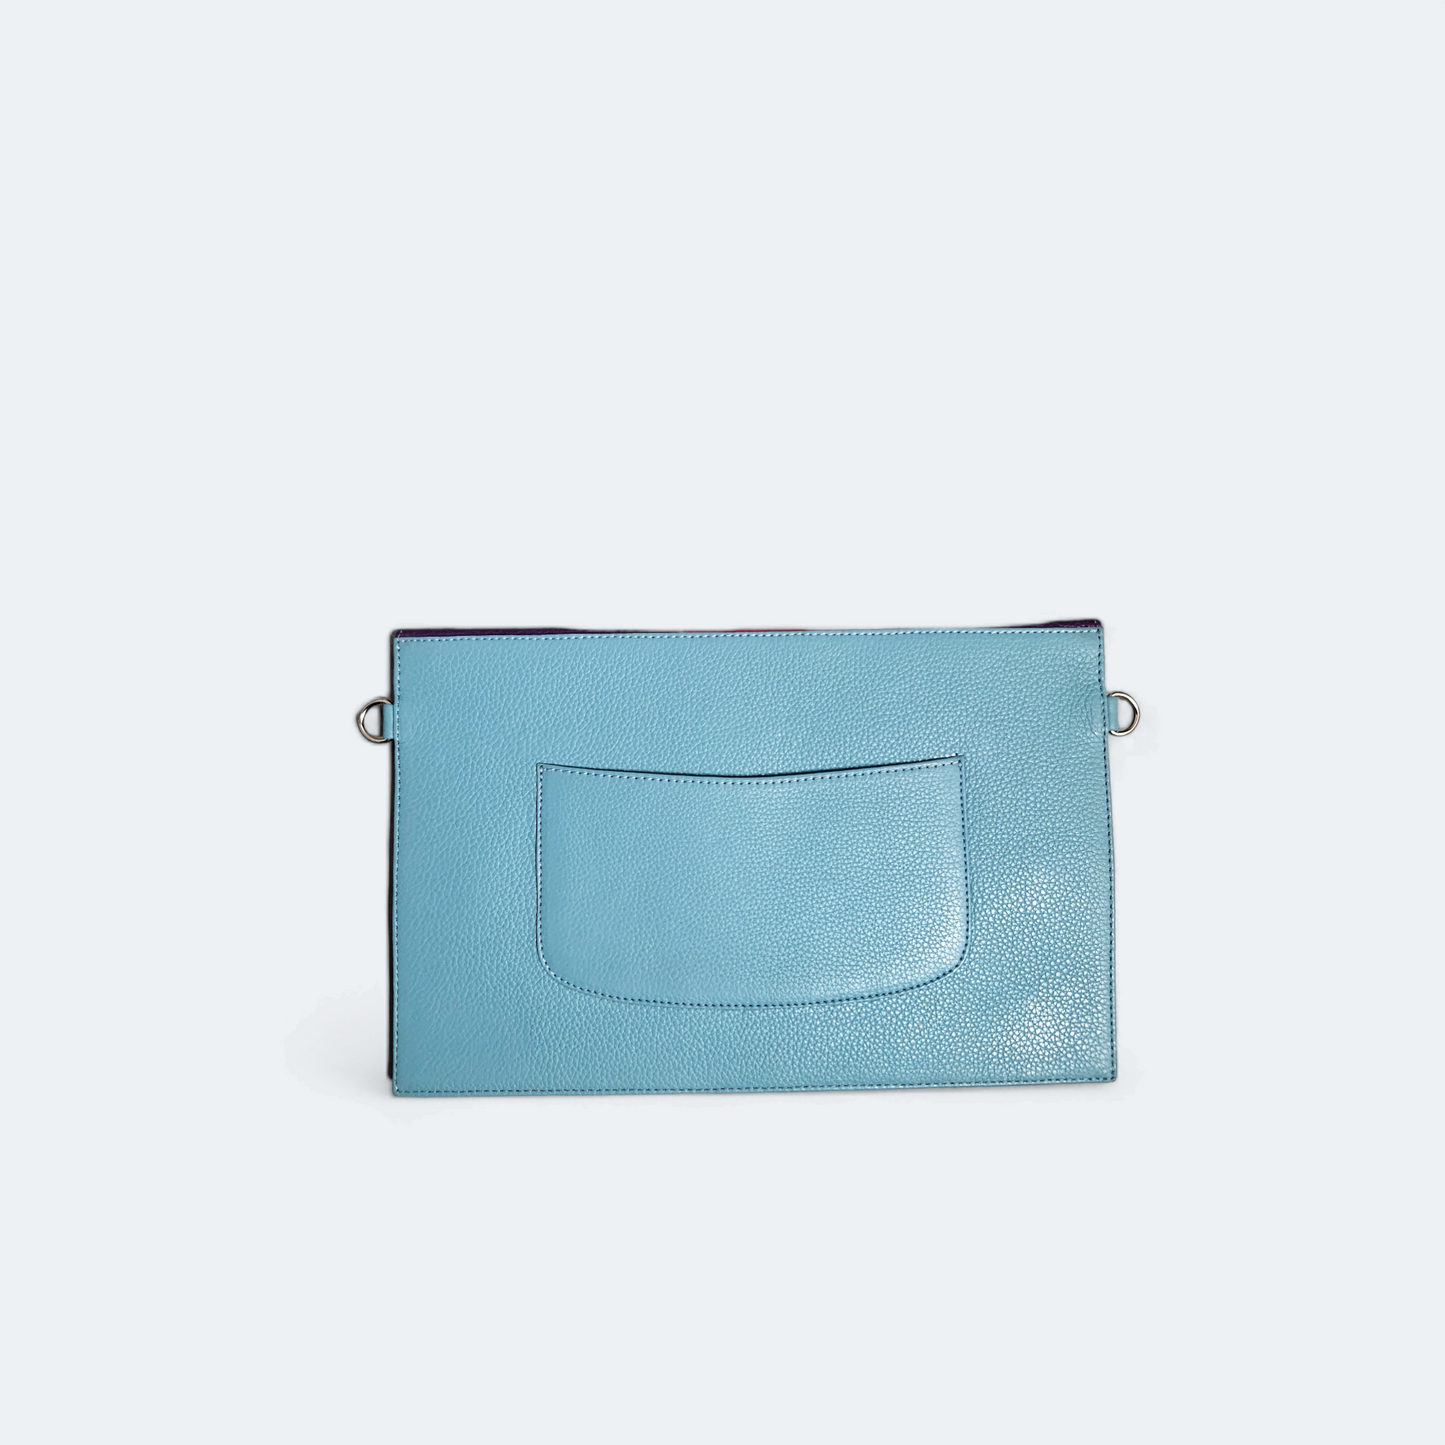 Multicolored turquoise blue pouch